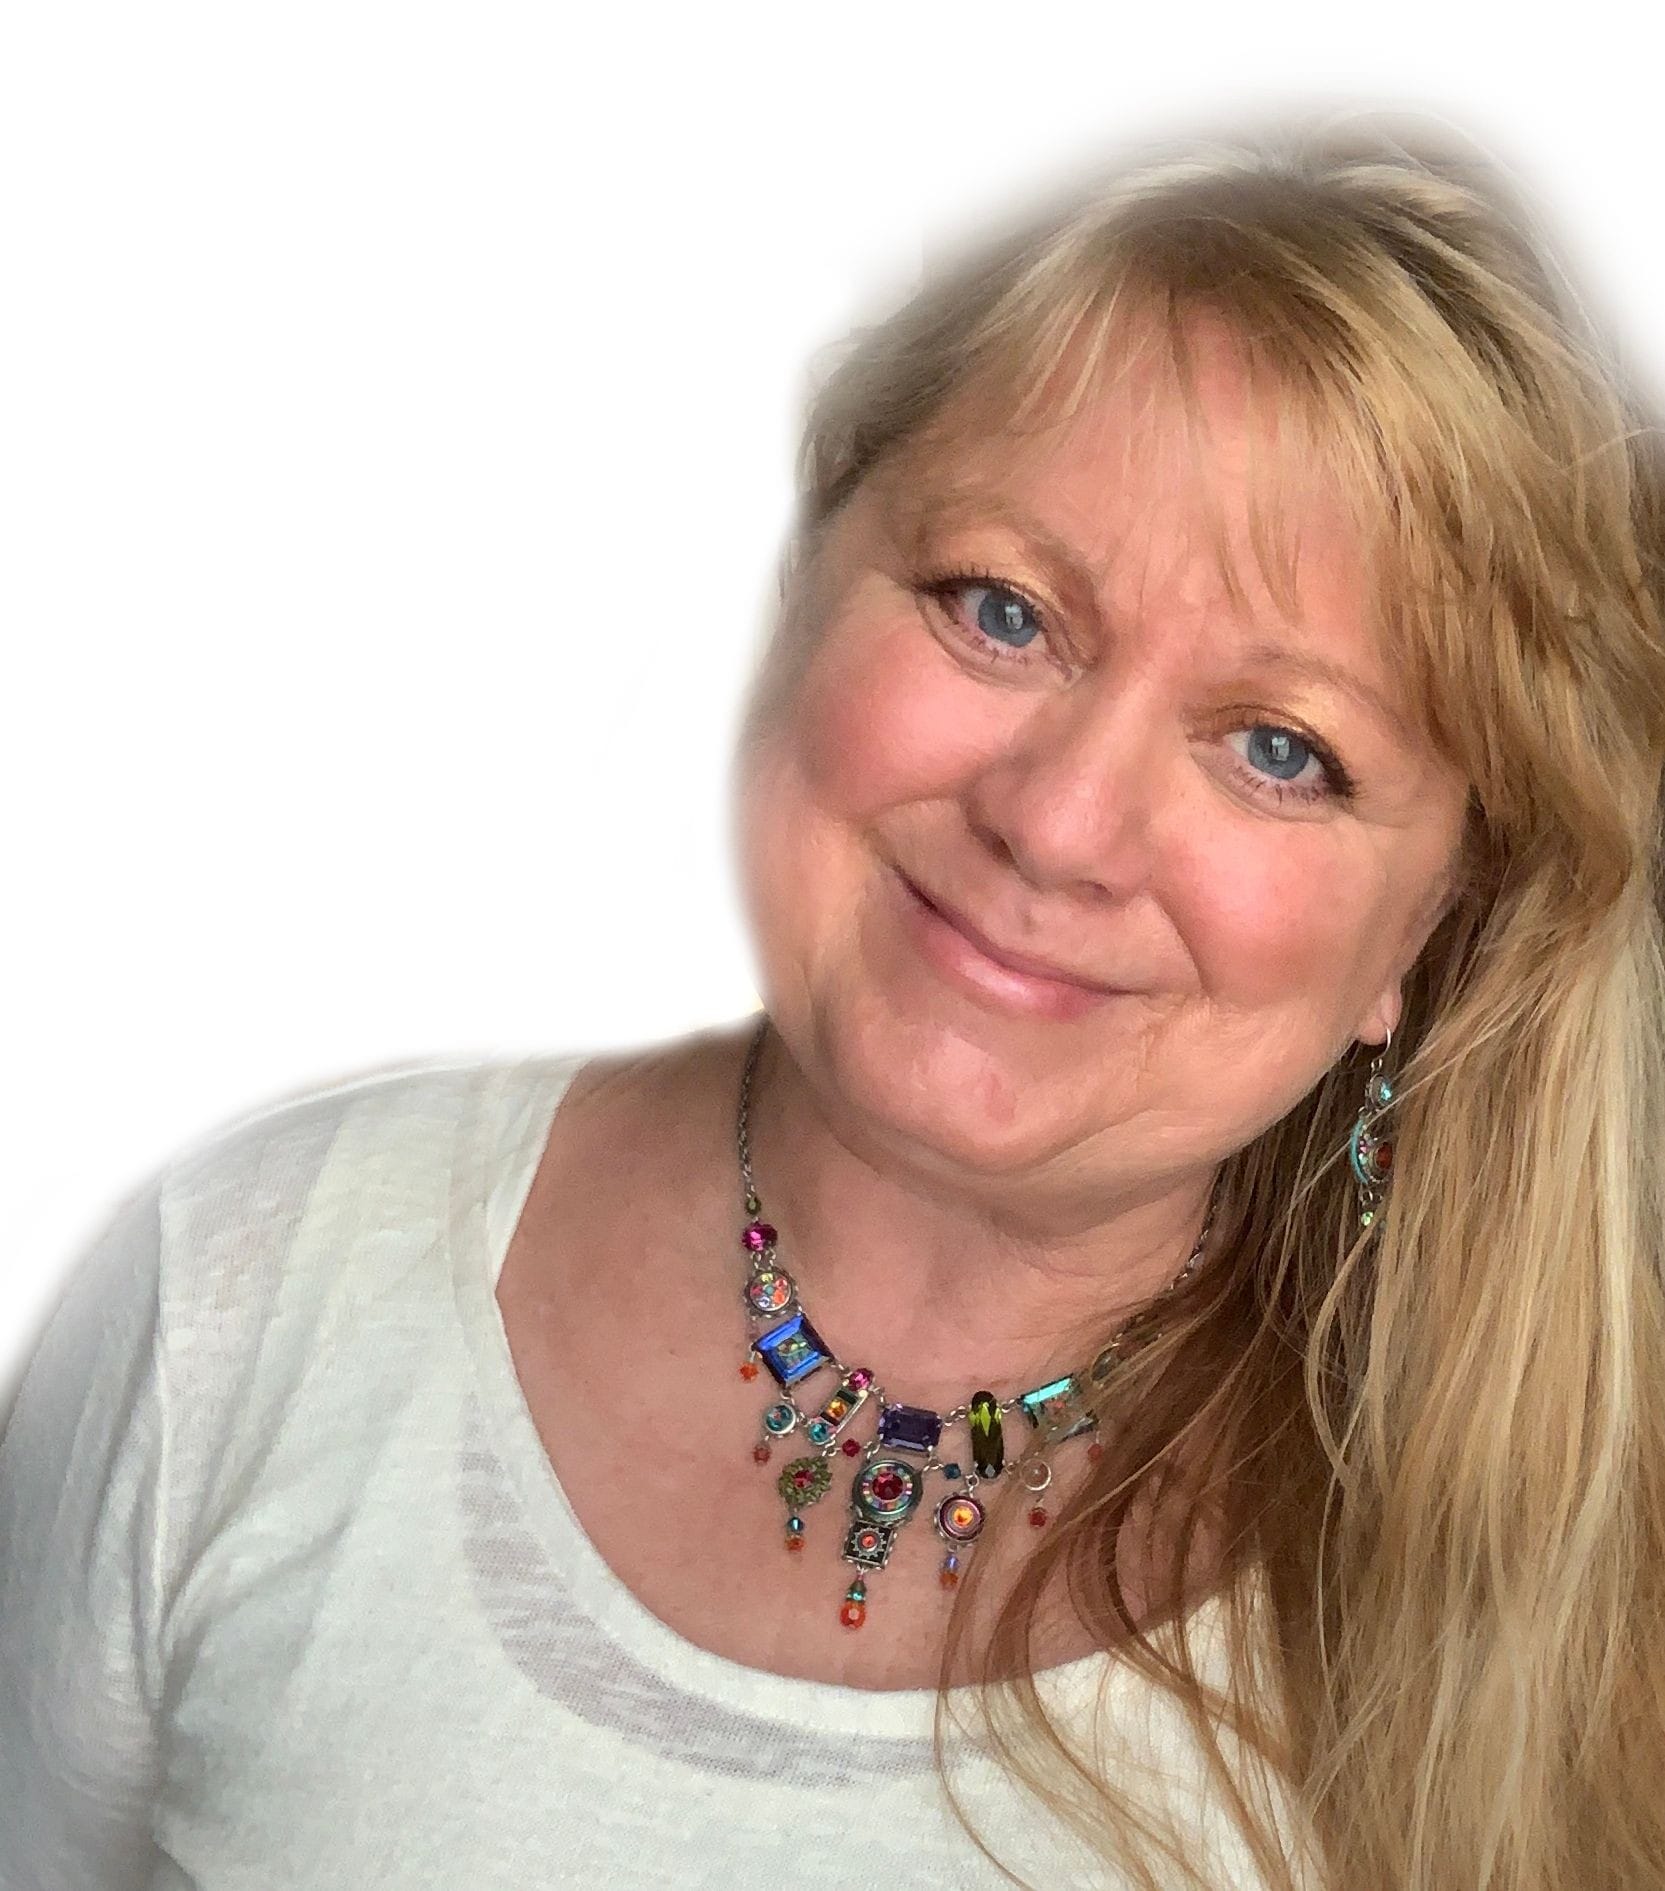 is a Spiritual Counselor, Intuitive healer, artist, musician and storyteller. She is has been a Dragon communicator educator for over 25 years. She is a delight